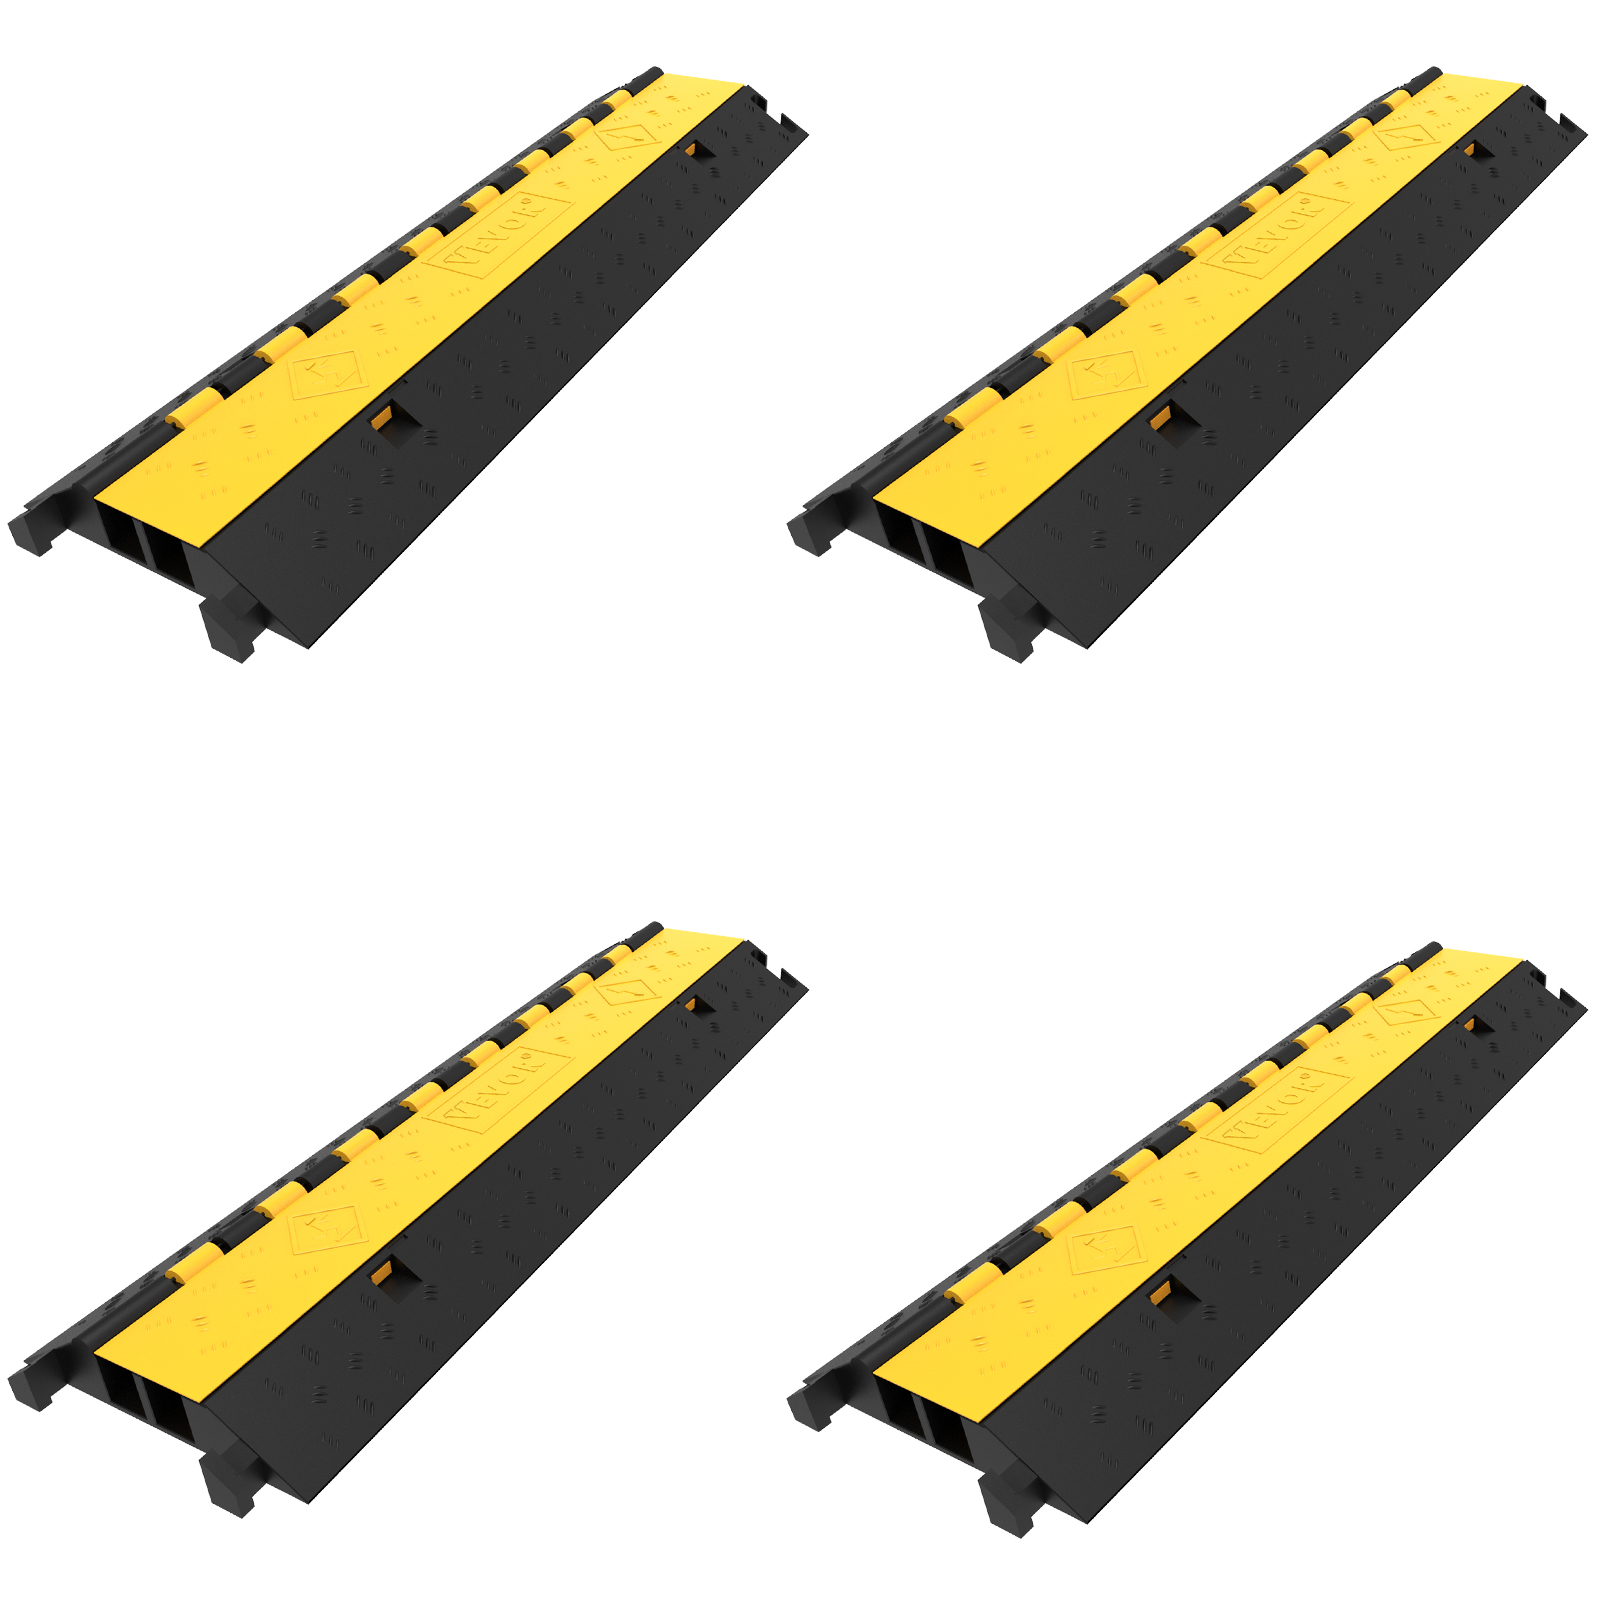 4 Pack Rubber Cable Protector Ramp 2 Channel Heavy Duty 66,000lb Capacity Cable от Vevor Many GEOs